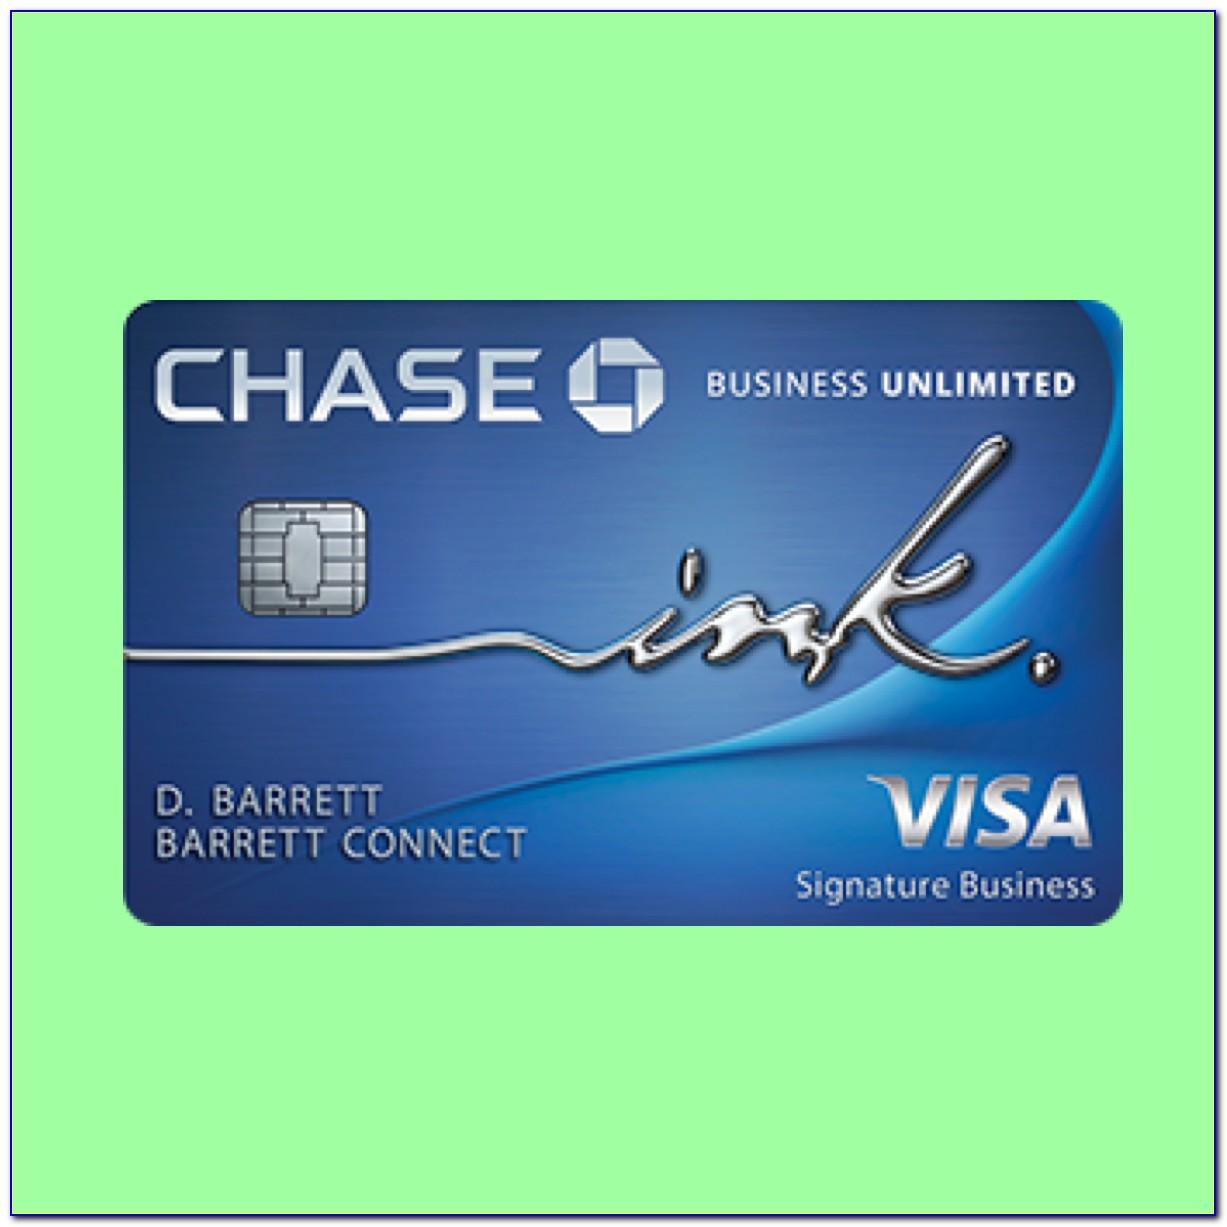 Chase Ink Business Cash Card Review